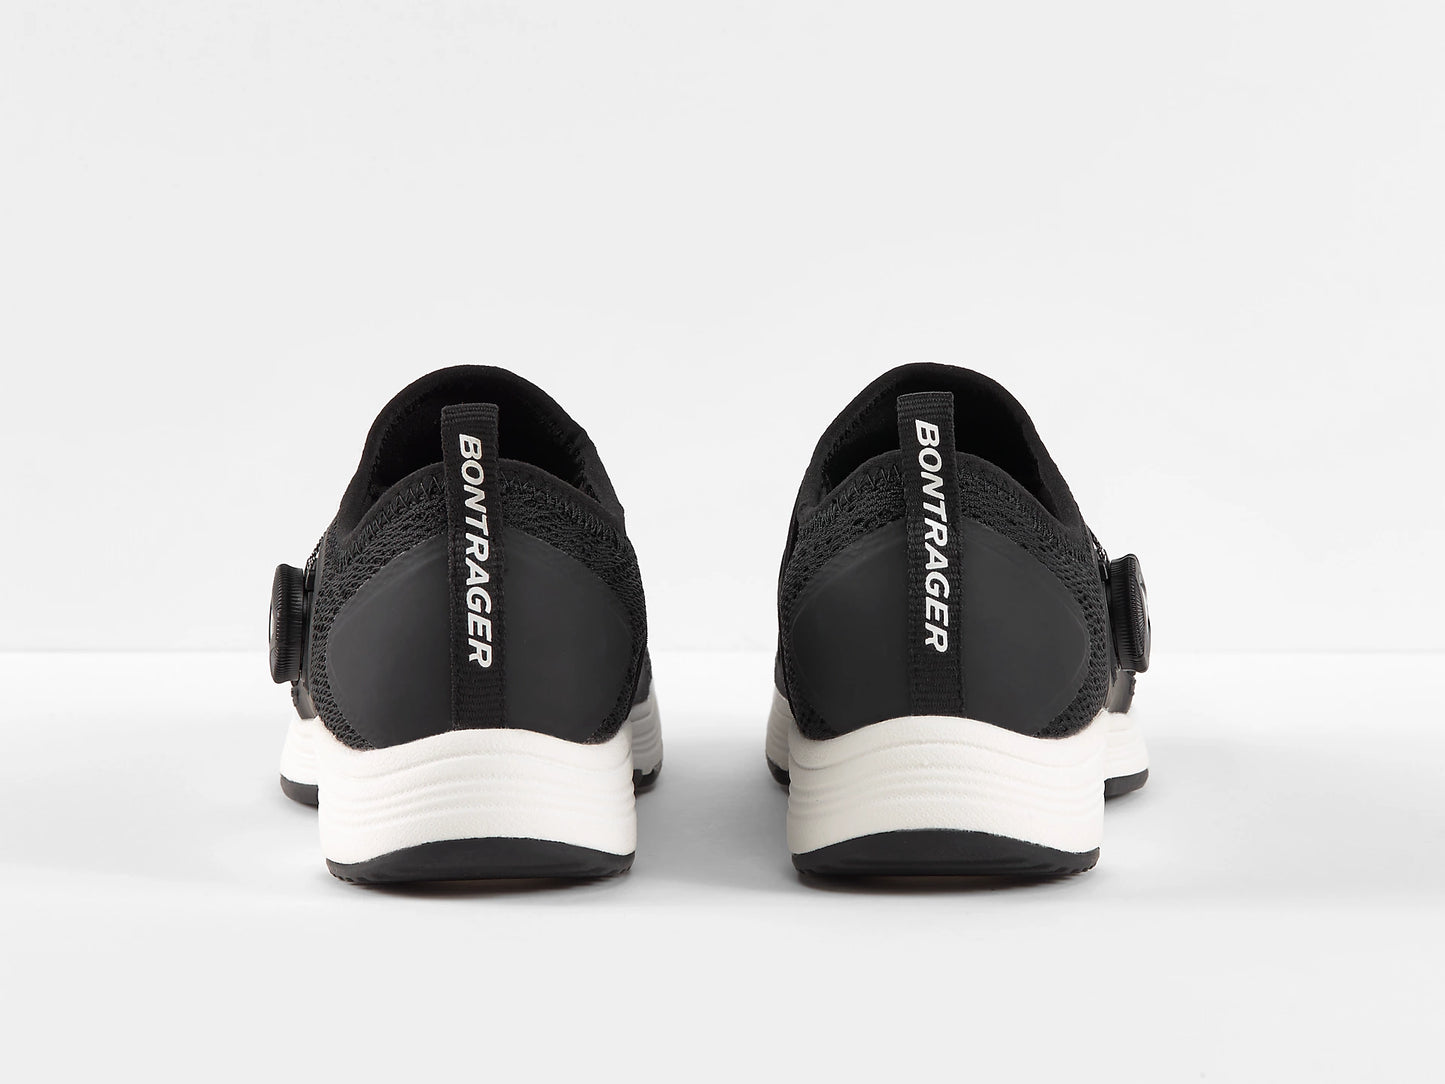 Bontrager Cadence Spin Cycling Shoe